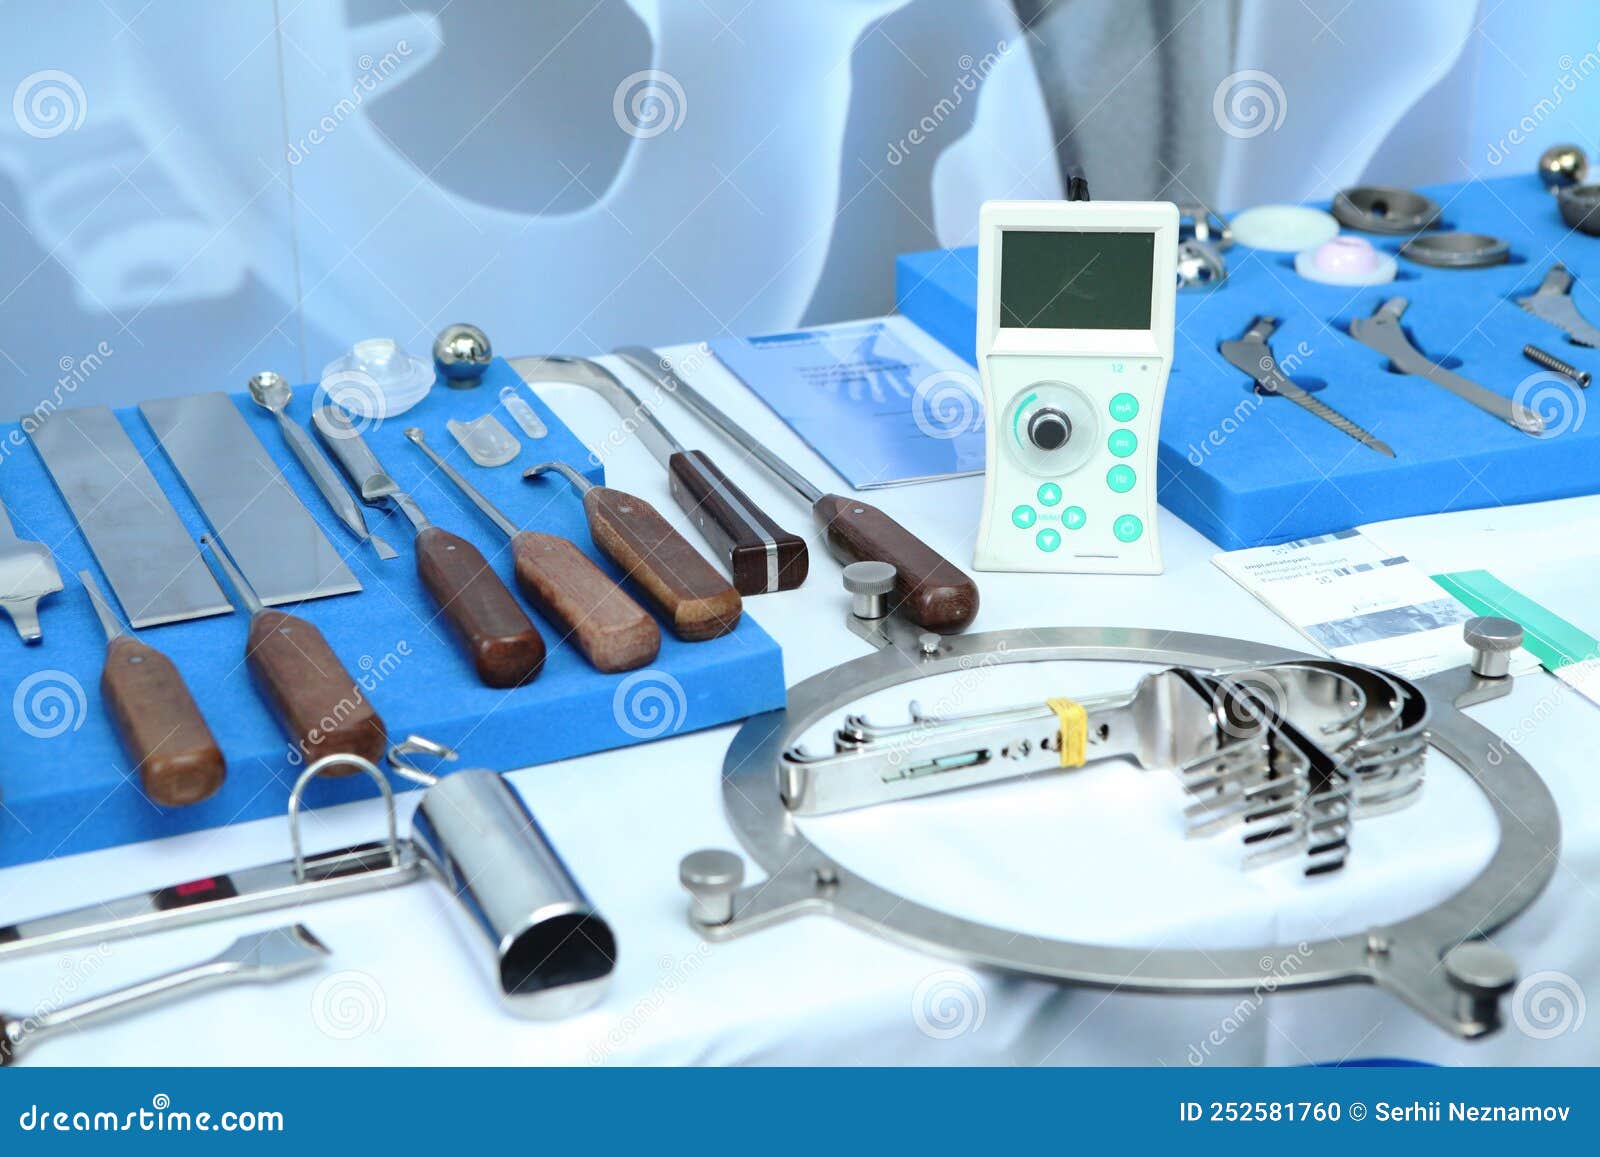 Exhibition of Orthopedic Instruments. a Unique and Sophisticated